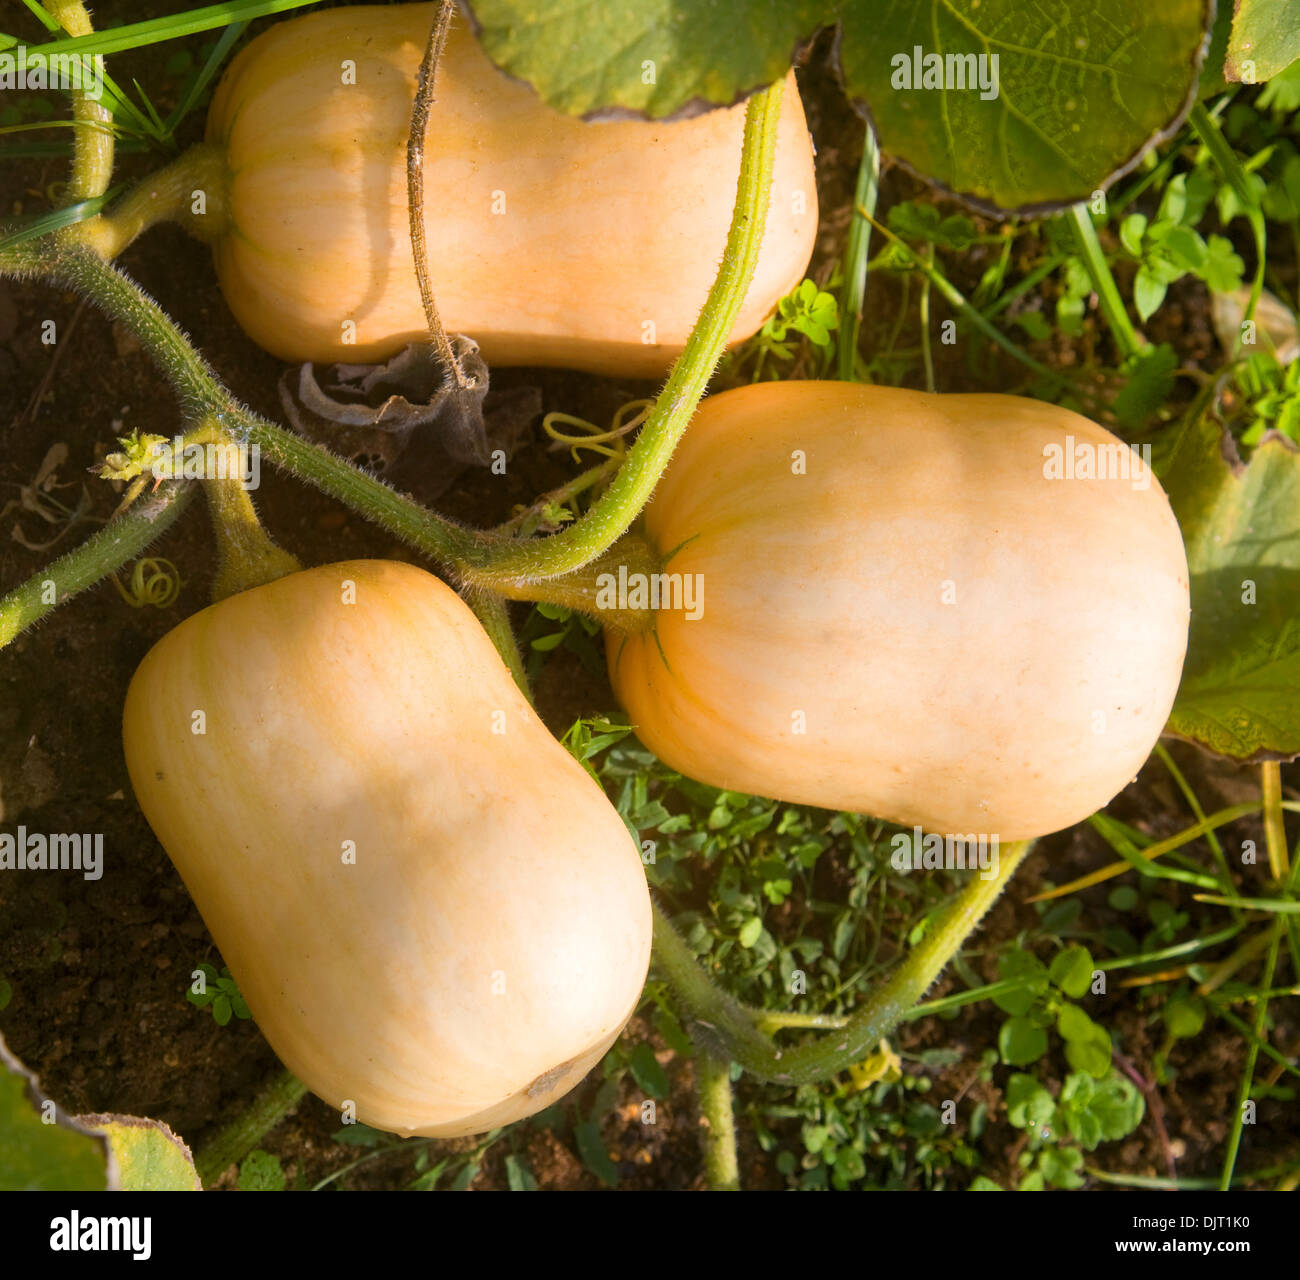 List 90+ Images Pictures Of Butternut Squash Growing Latest